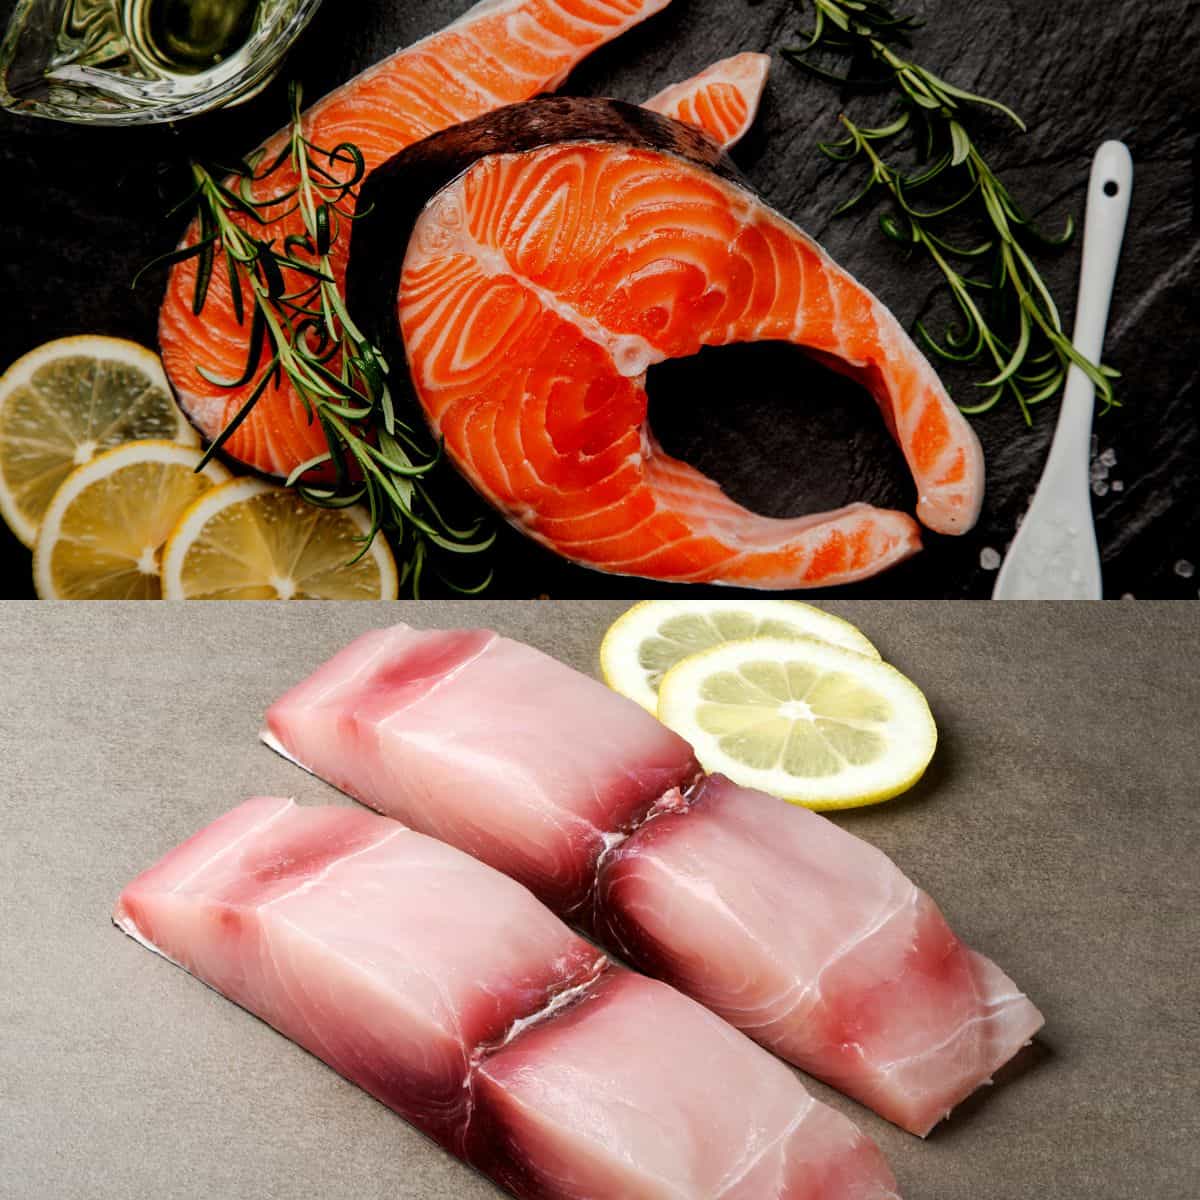 Two photos one on top of the other. On the top is a photo of raw wild-caught salmon and on the bottom are raw wild-caught Mahi Mahi fillets with lemon slices around them.